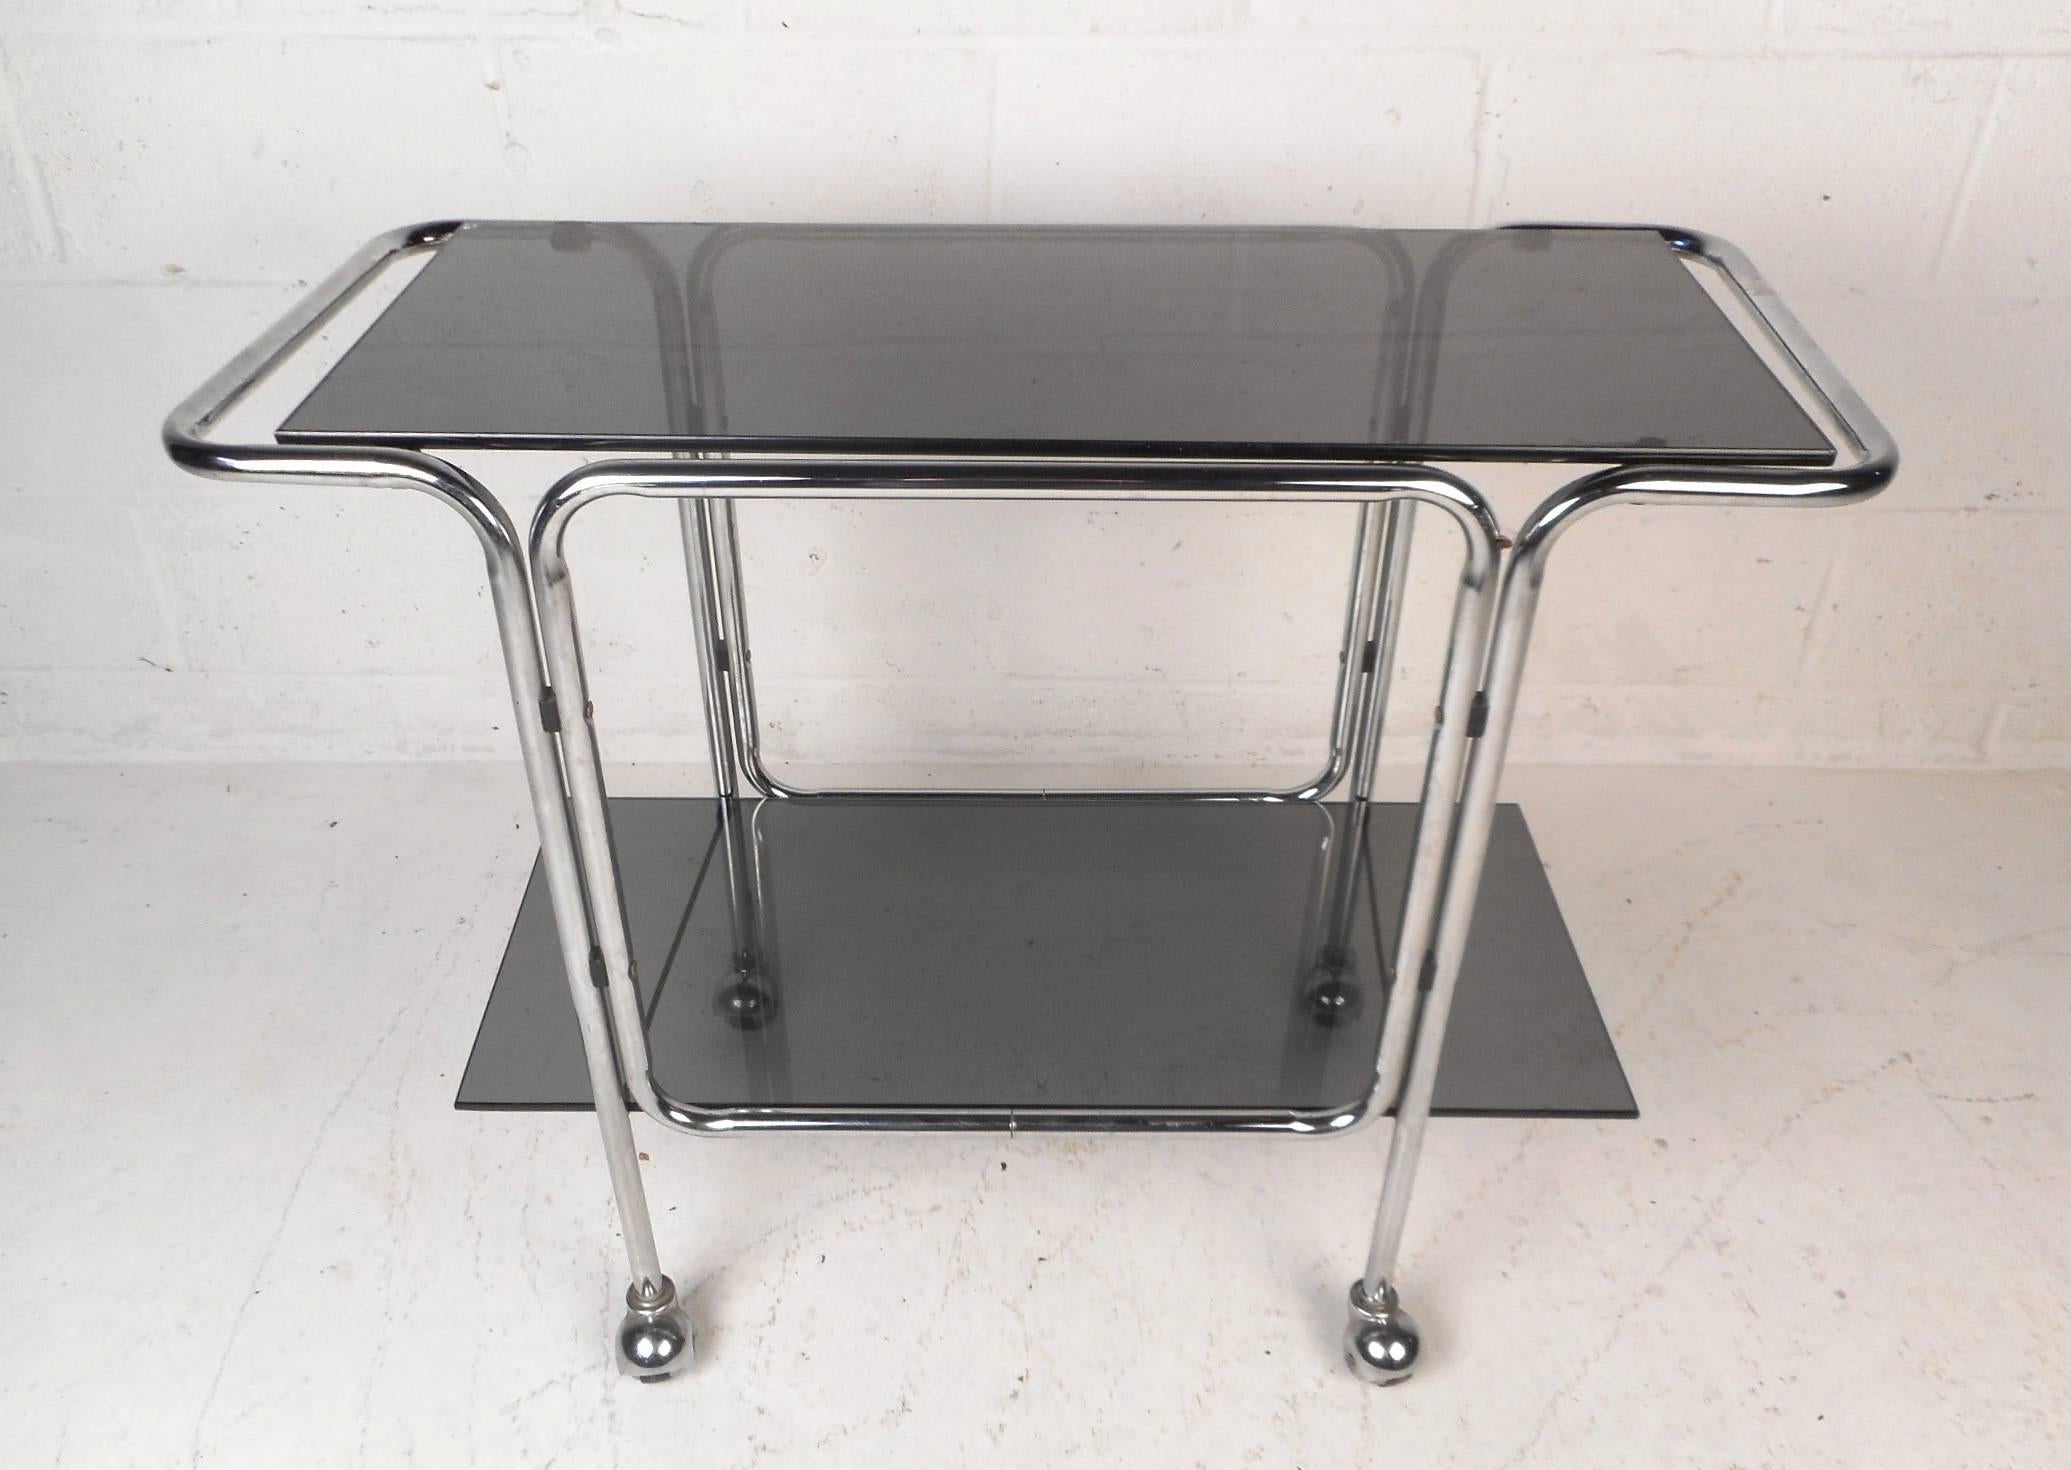 A stunning vintage modern serving cart with two smoked glass shelves and castors for convenience. The sleek chrome tubular frame and two tiers for setting items on shows quality design. Works perfectly as a functioning serving cart or simply a